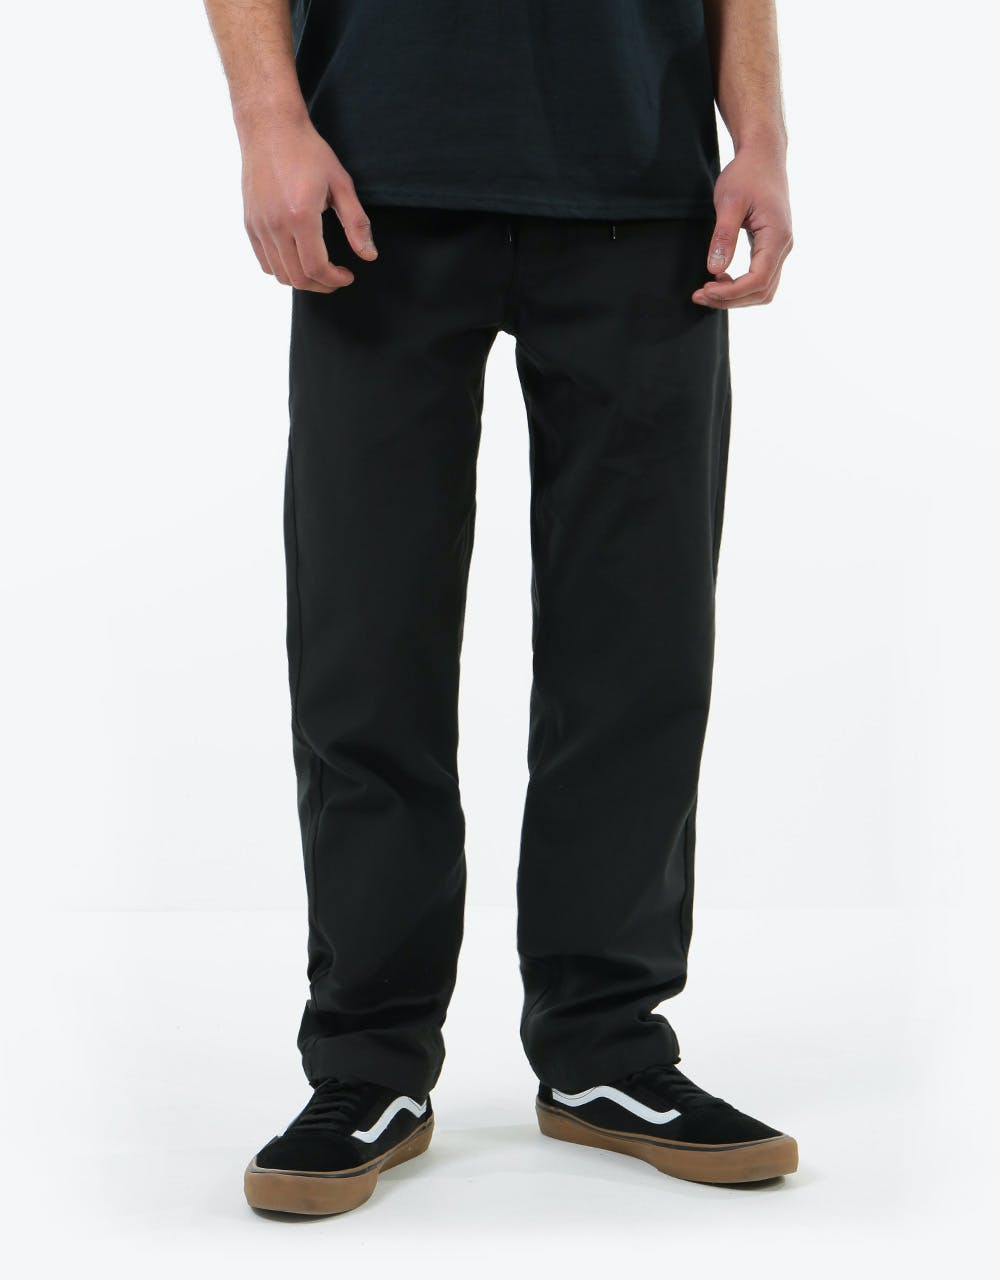 Vans Authentic Chino Glide Pro Trousers - Black